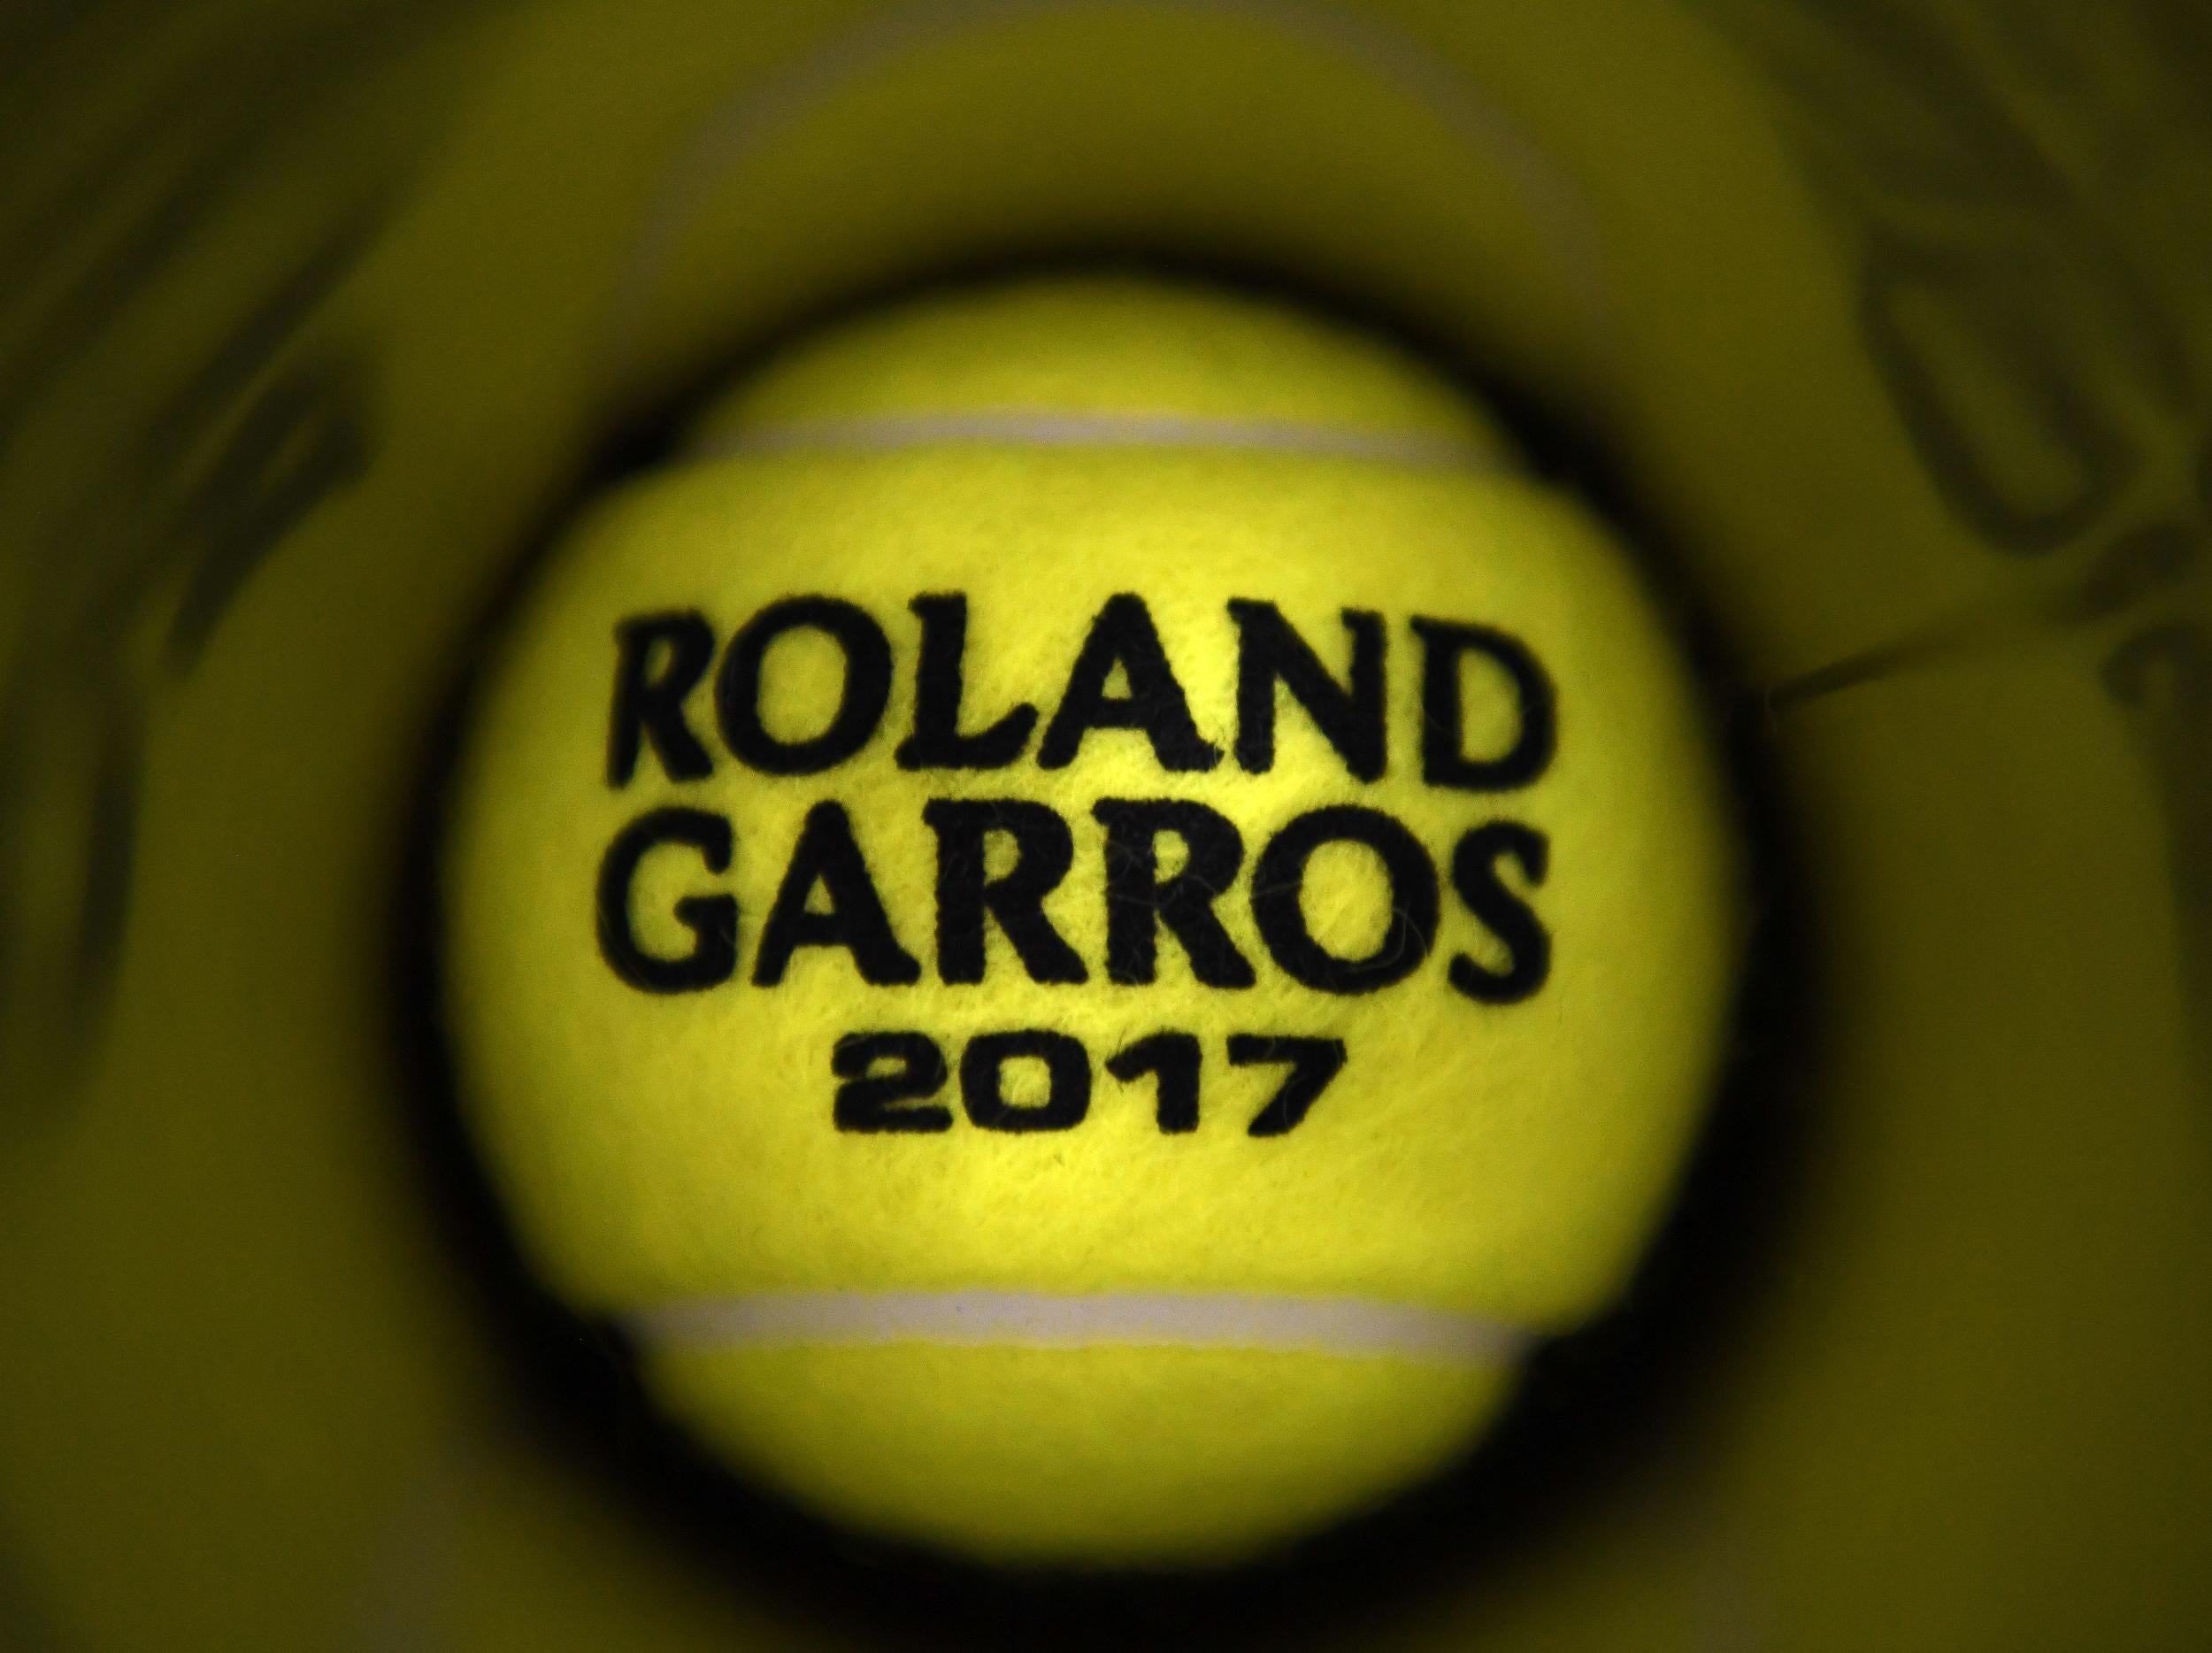 &#13;
It was another busy day at Roland-Garros &#13;